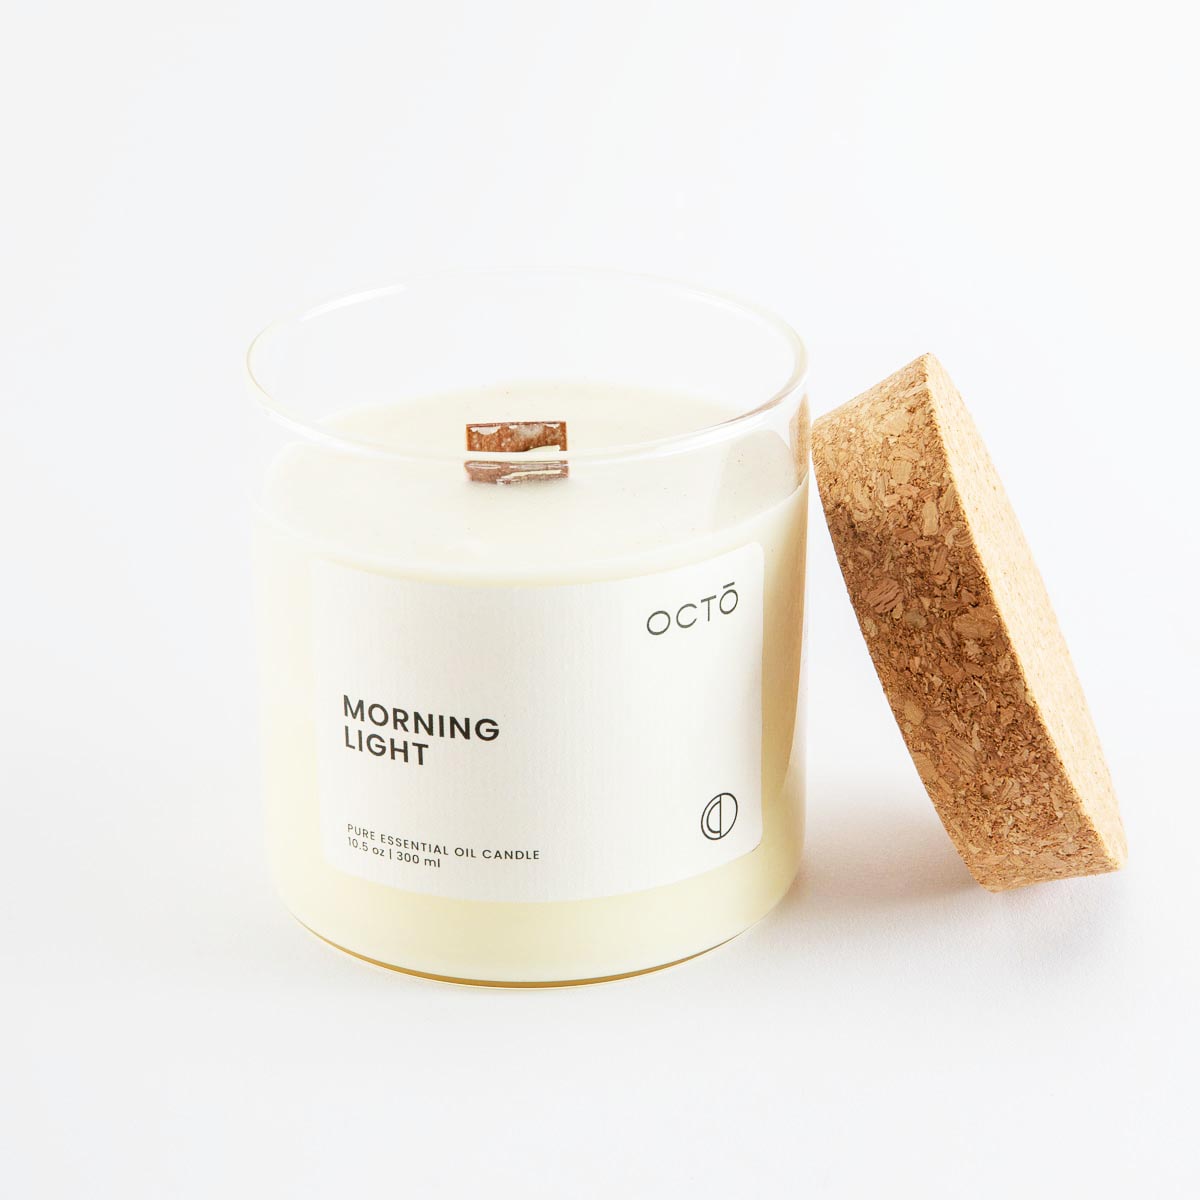 Octo & Co Hand-Poured Plant-Based Wood Wick Candles